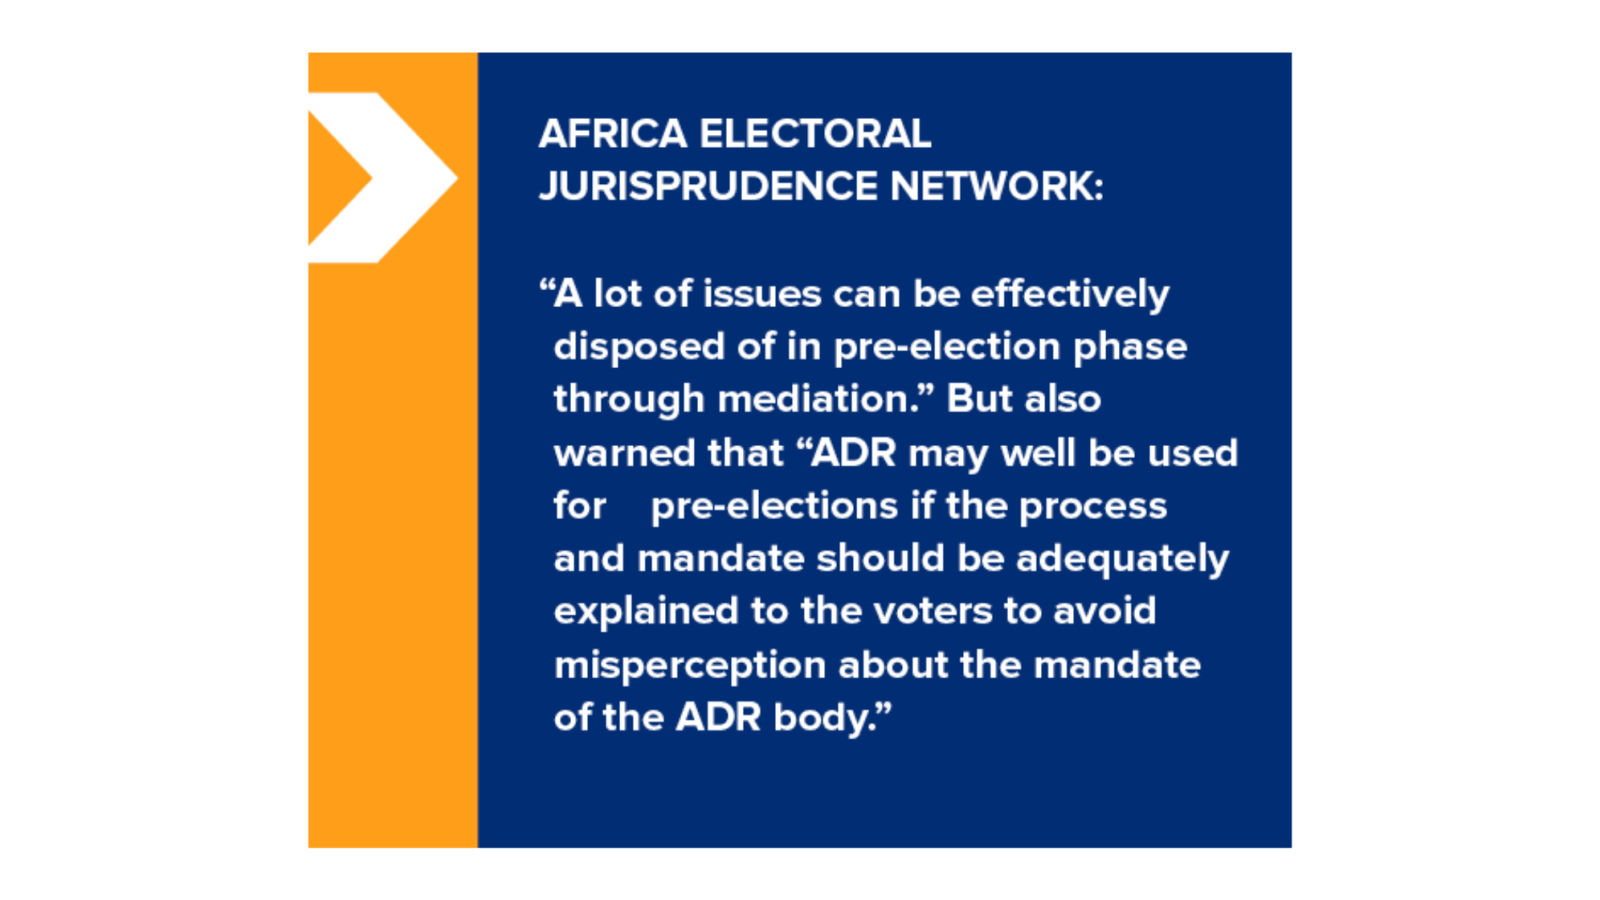 AFRICA ELECTORAL JURISPRUDENCE NETWORK: "A lot of issues can be effectively disposed of in pre-election phase through mediation." But also warned that "ADR may well be used for pre-elections if the process and mandate should be adequately explained to the voters to avoid misperception about the mandate of the ADR body."